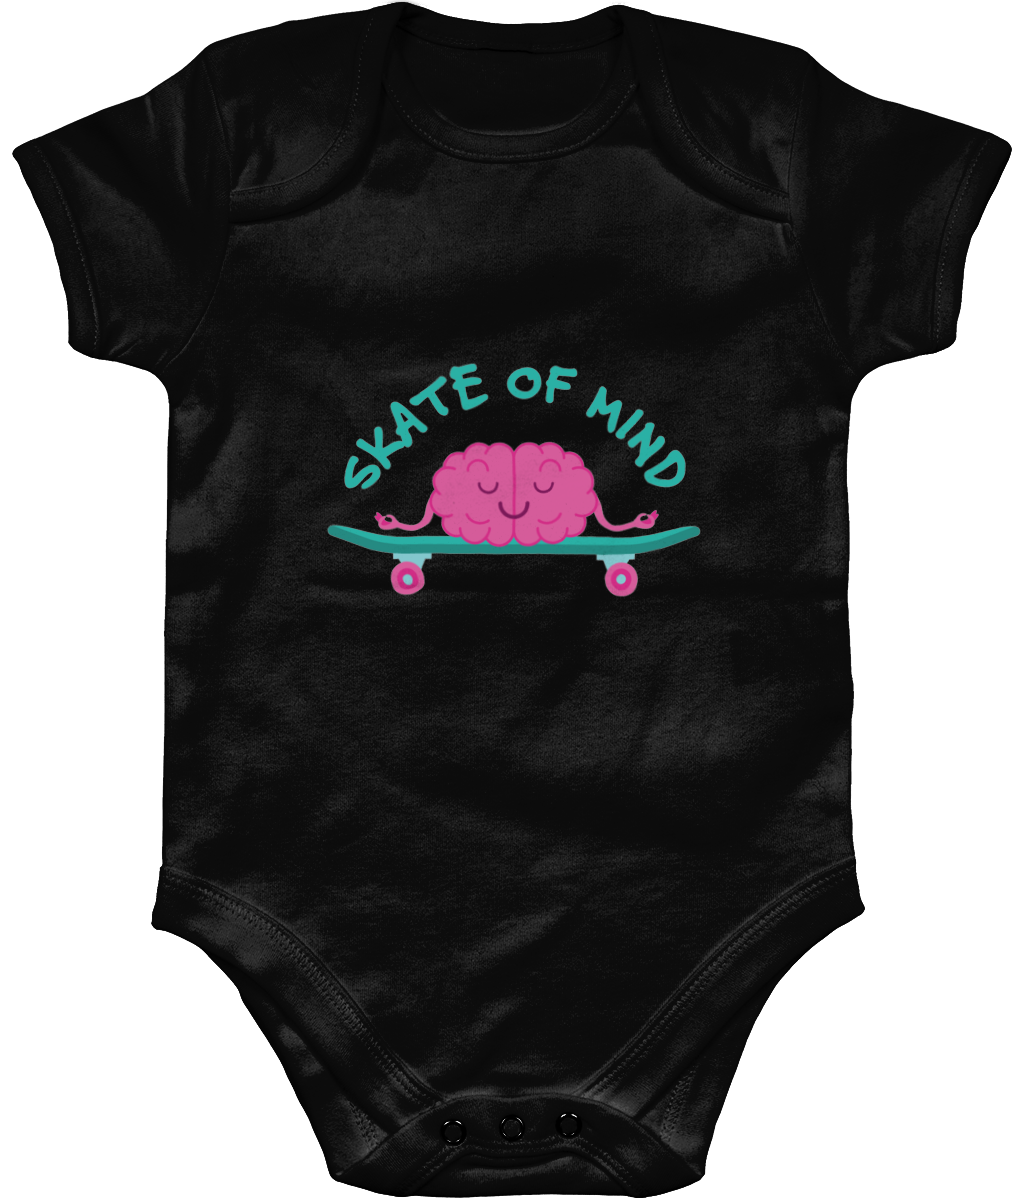 Soft Organic Cotton Baby Grow! Its Just a 'Skate of Mind'